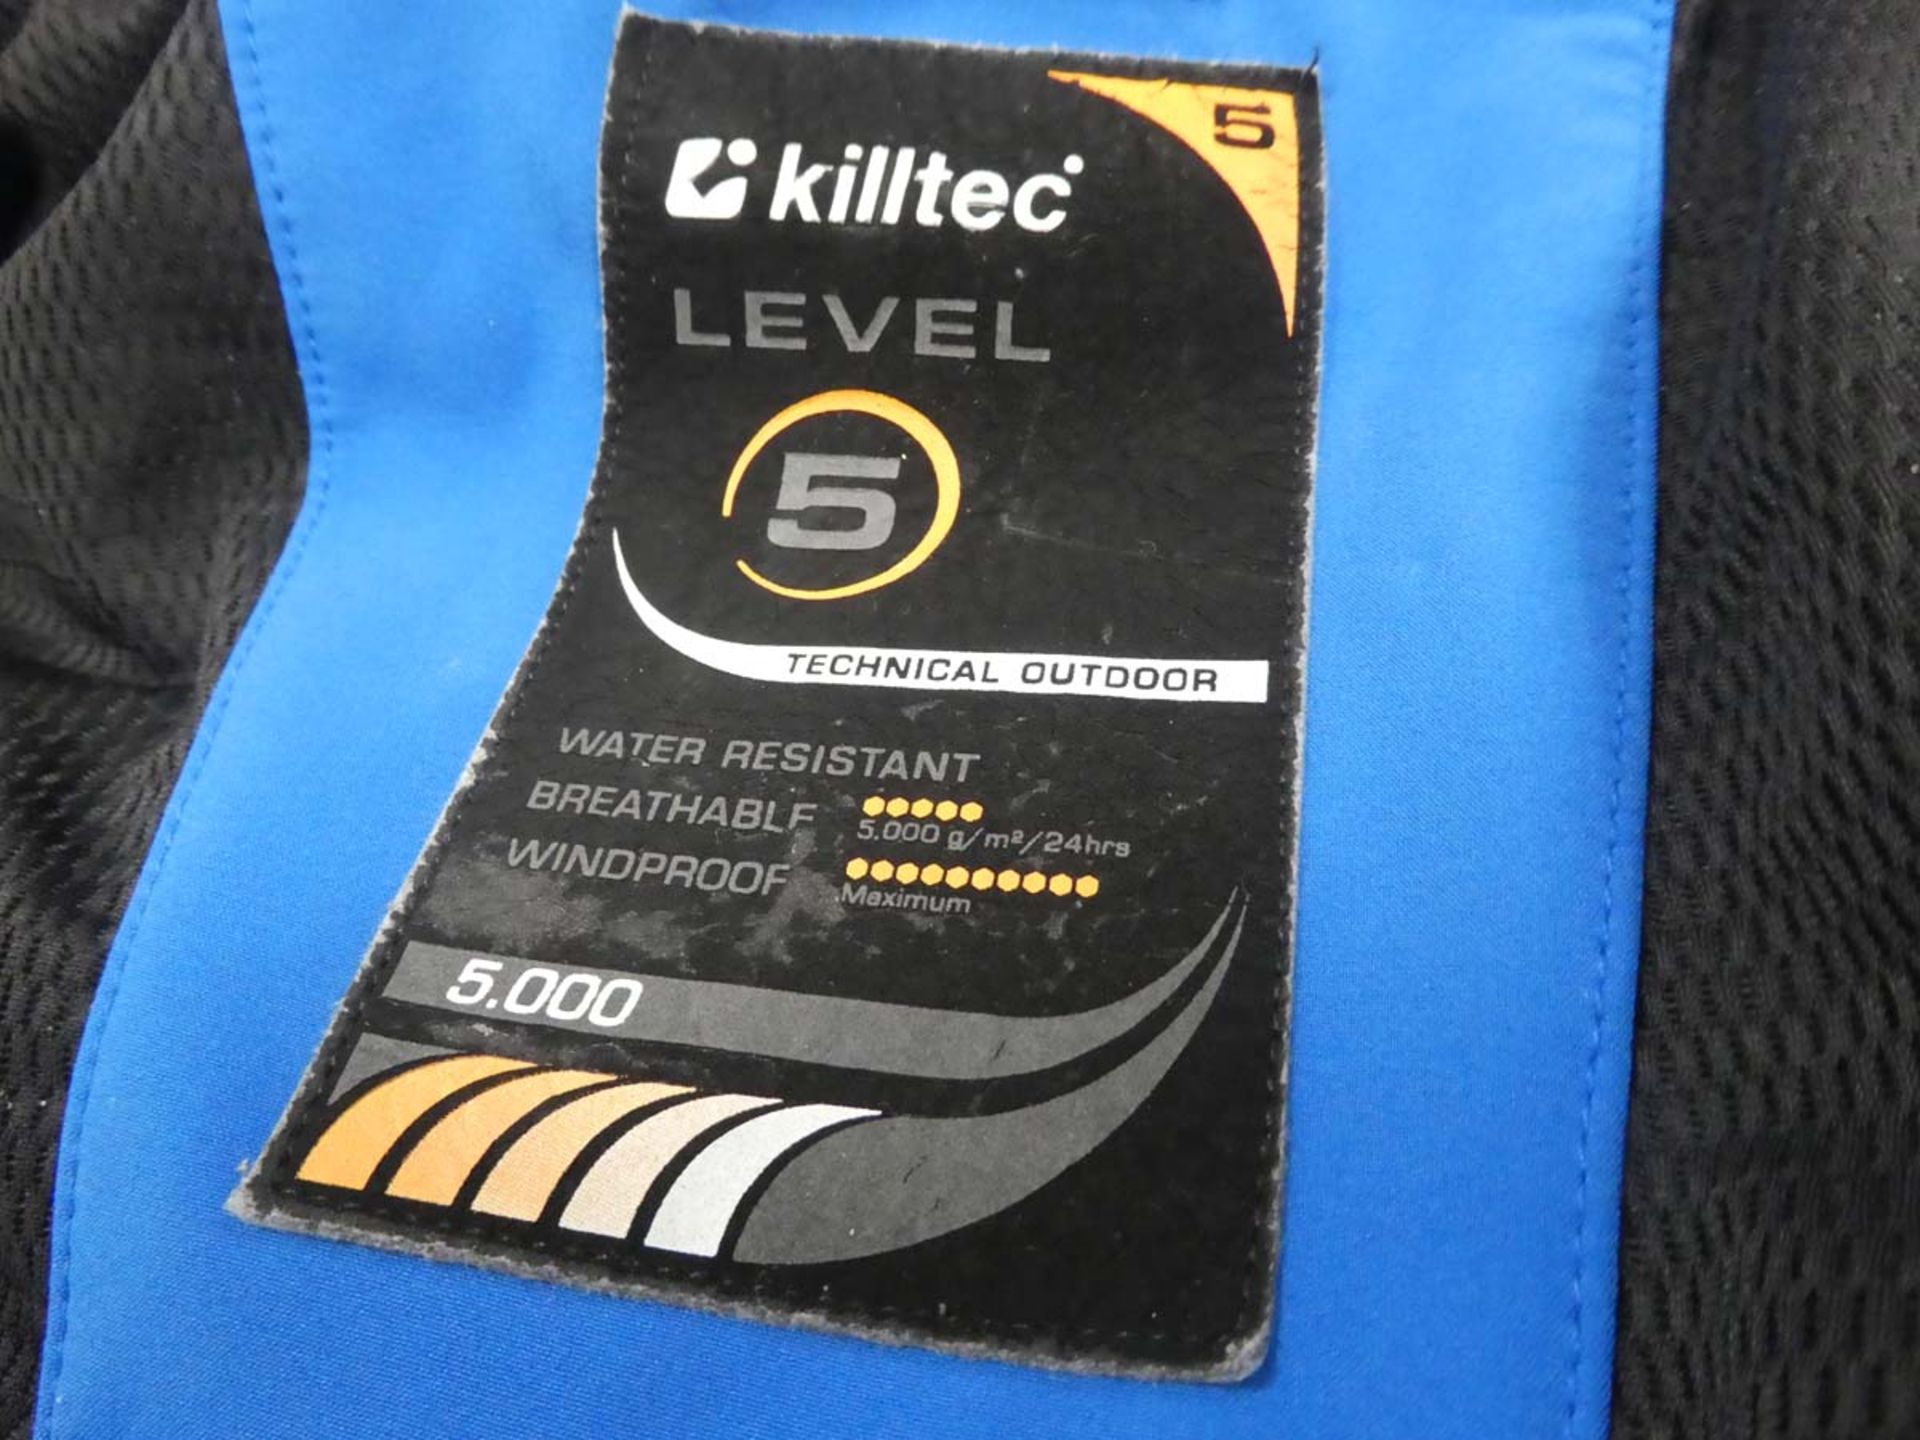 Killtec level 5 outdoor jacket (possibly used, but in good condition) in blue, size large - Image 2 of 2